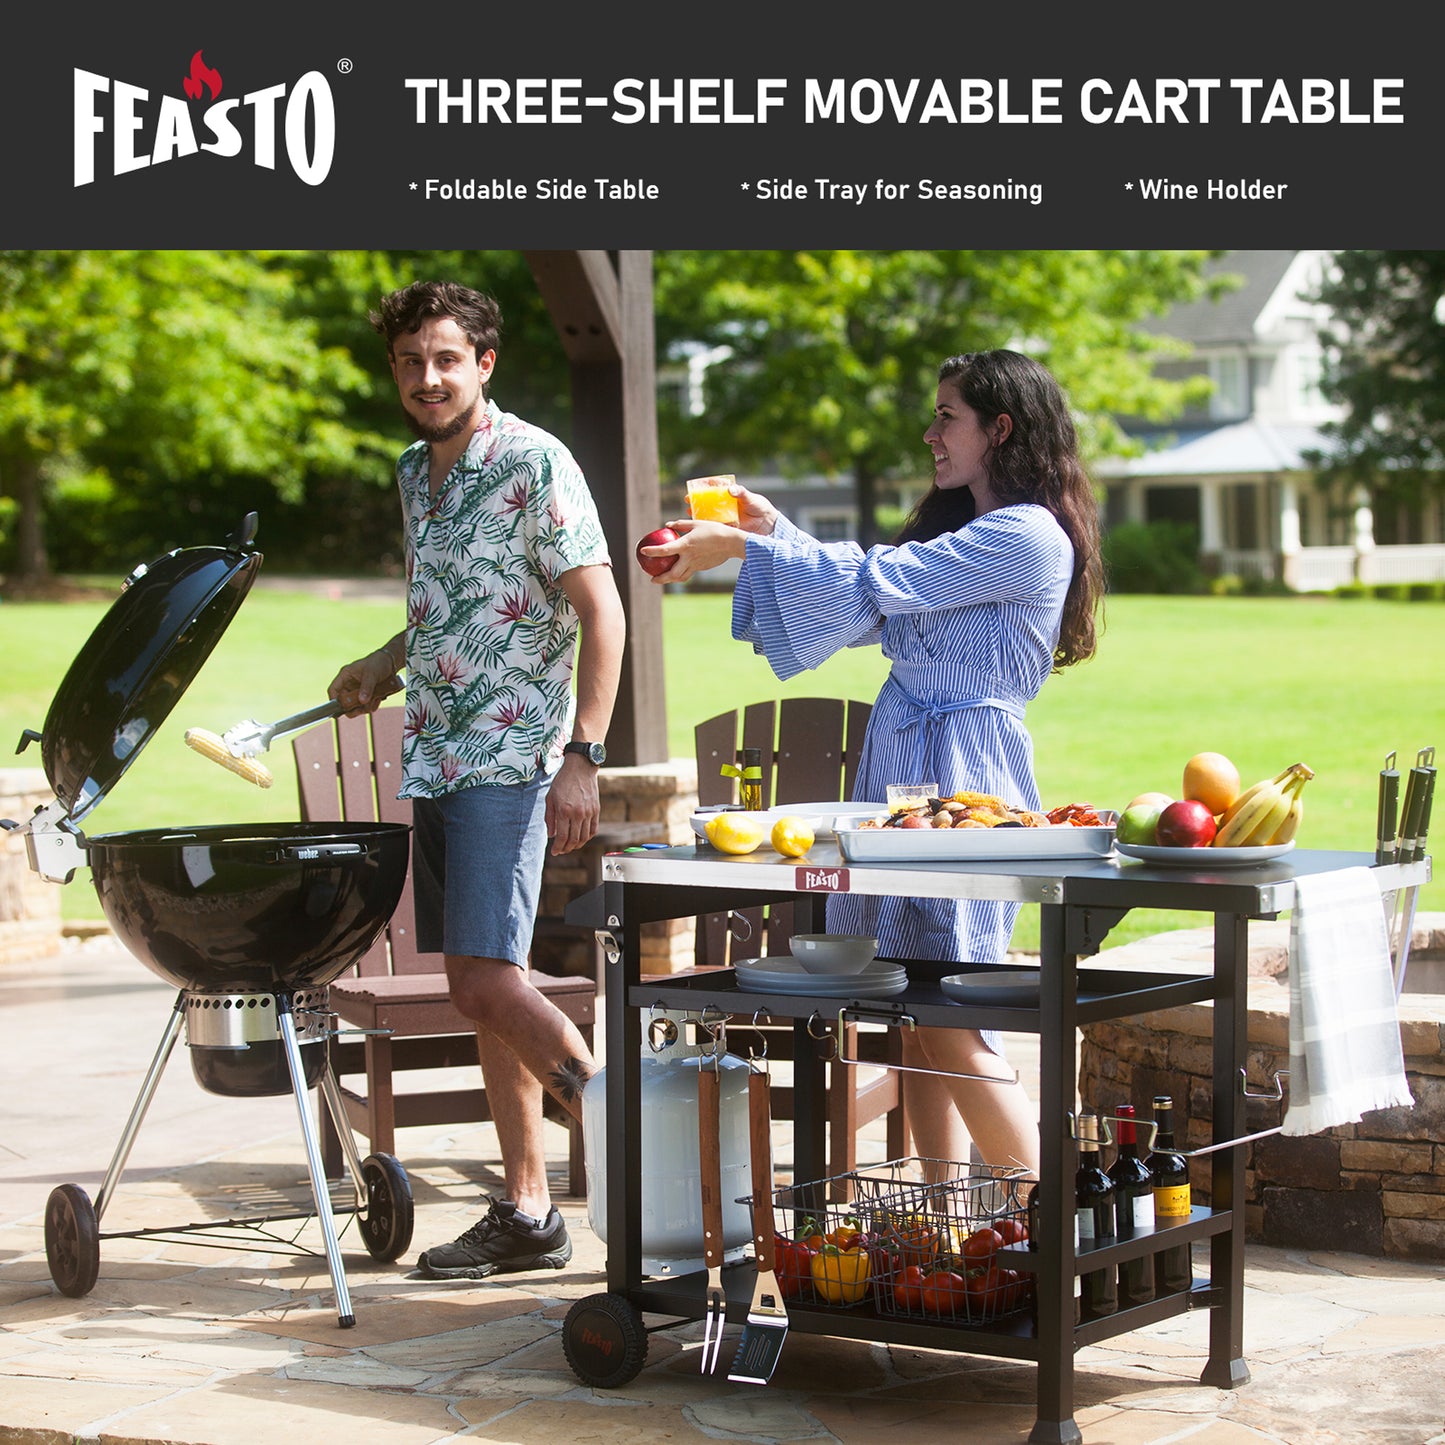 FEASTO Three-Shelf Movable Food Prep Cart Table  Home and Outdoor Multifunctional Stainless Steel Table Top Worktable on Two Wheels L50’’x W21.7’’x H33’’